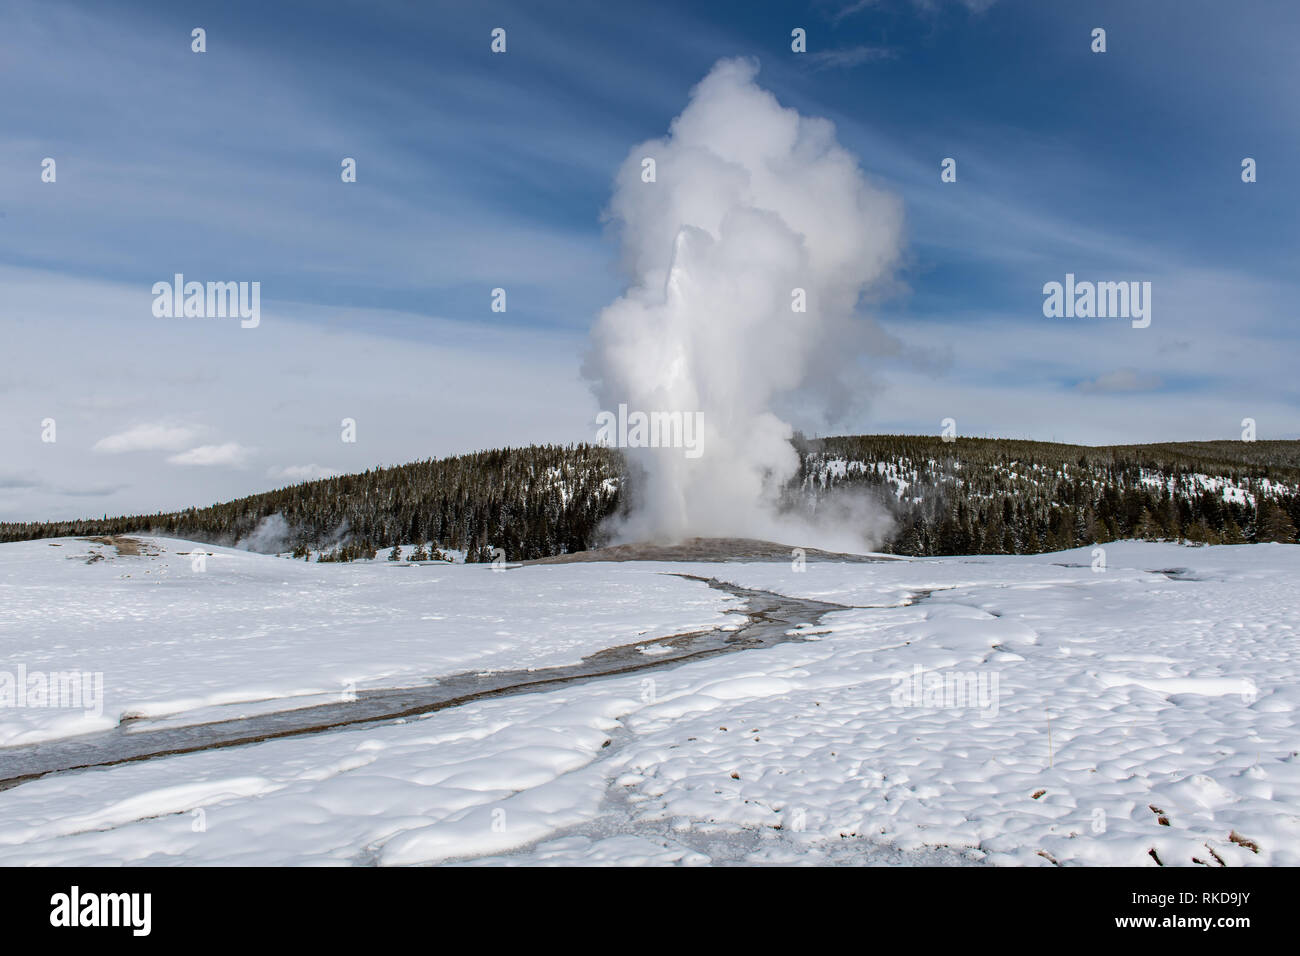 Eruption of Old Faithful geyser in Yellowstone National Park in Wyoming, USA Stock Photo